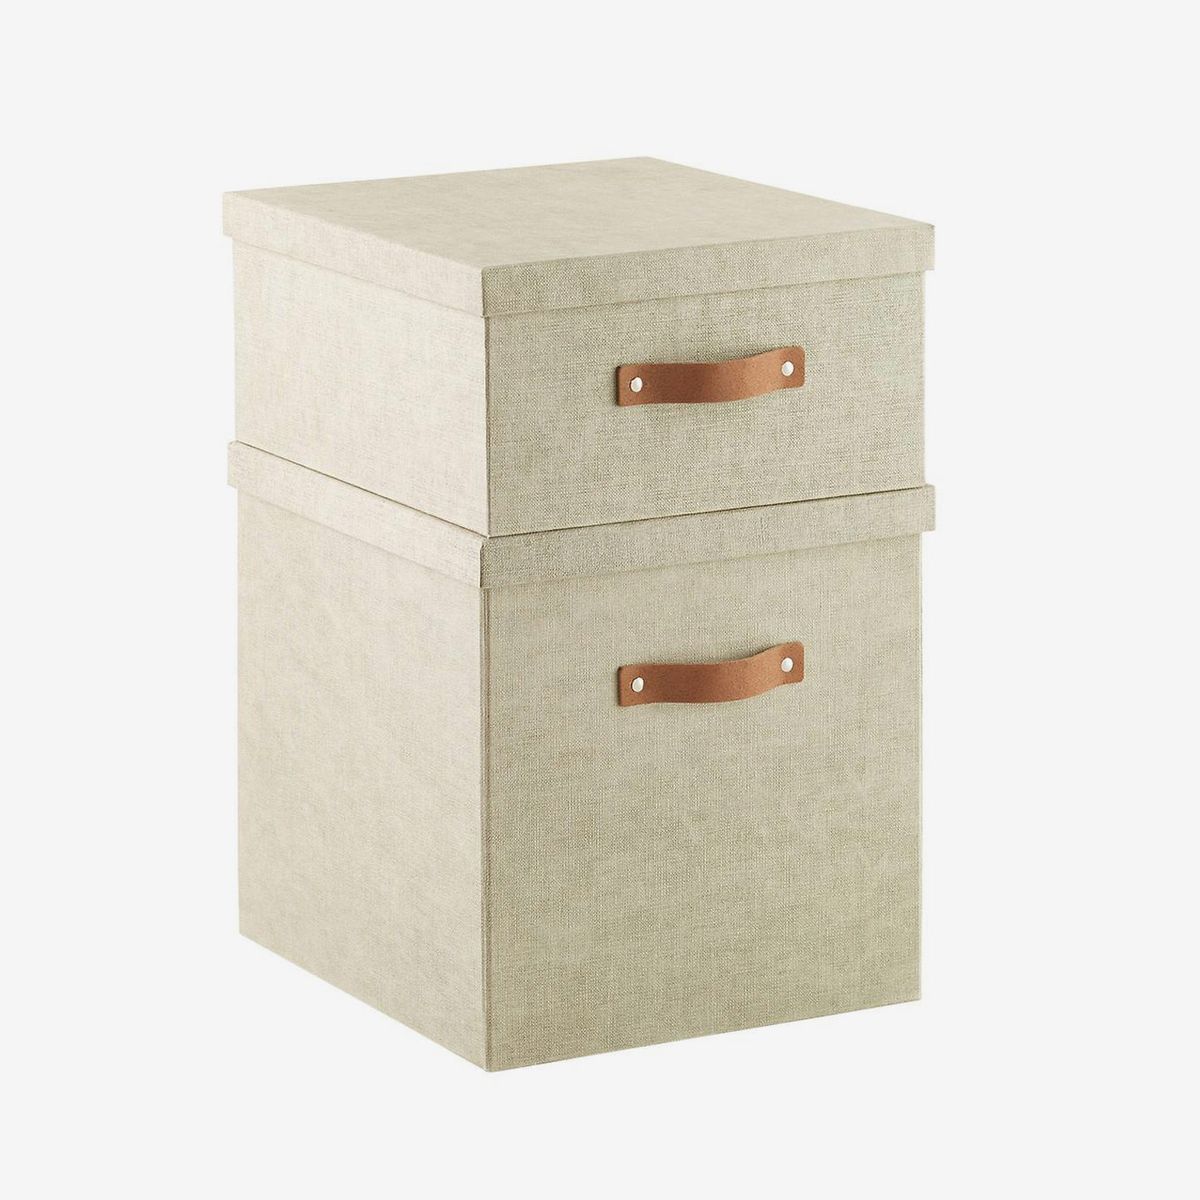 Two linen boxes stacked on top of each other.